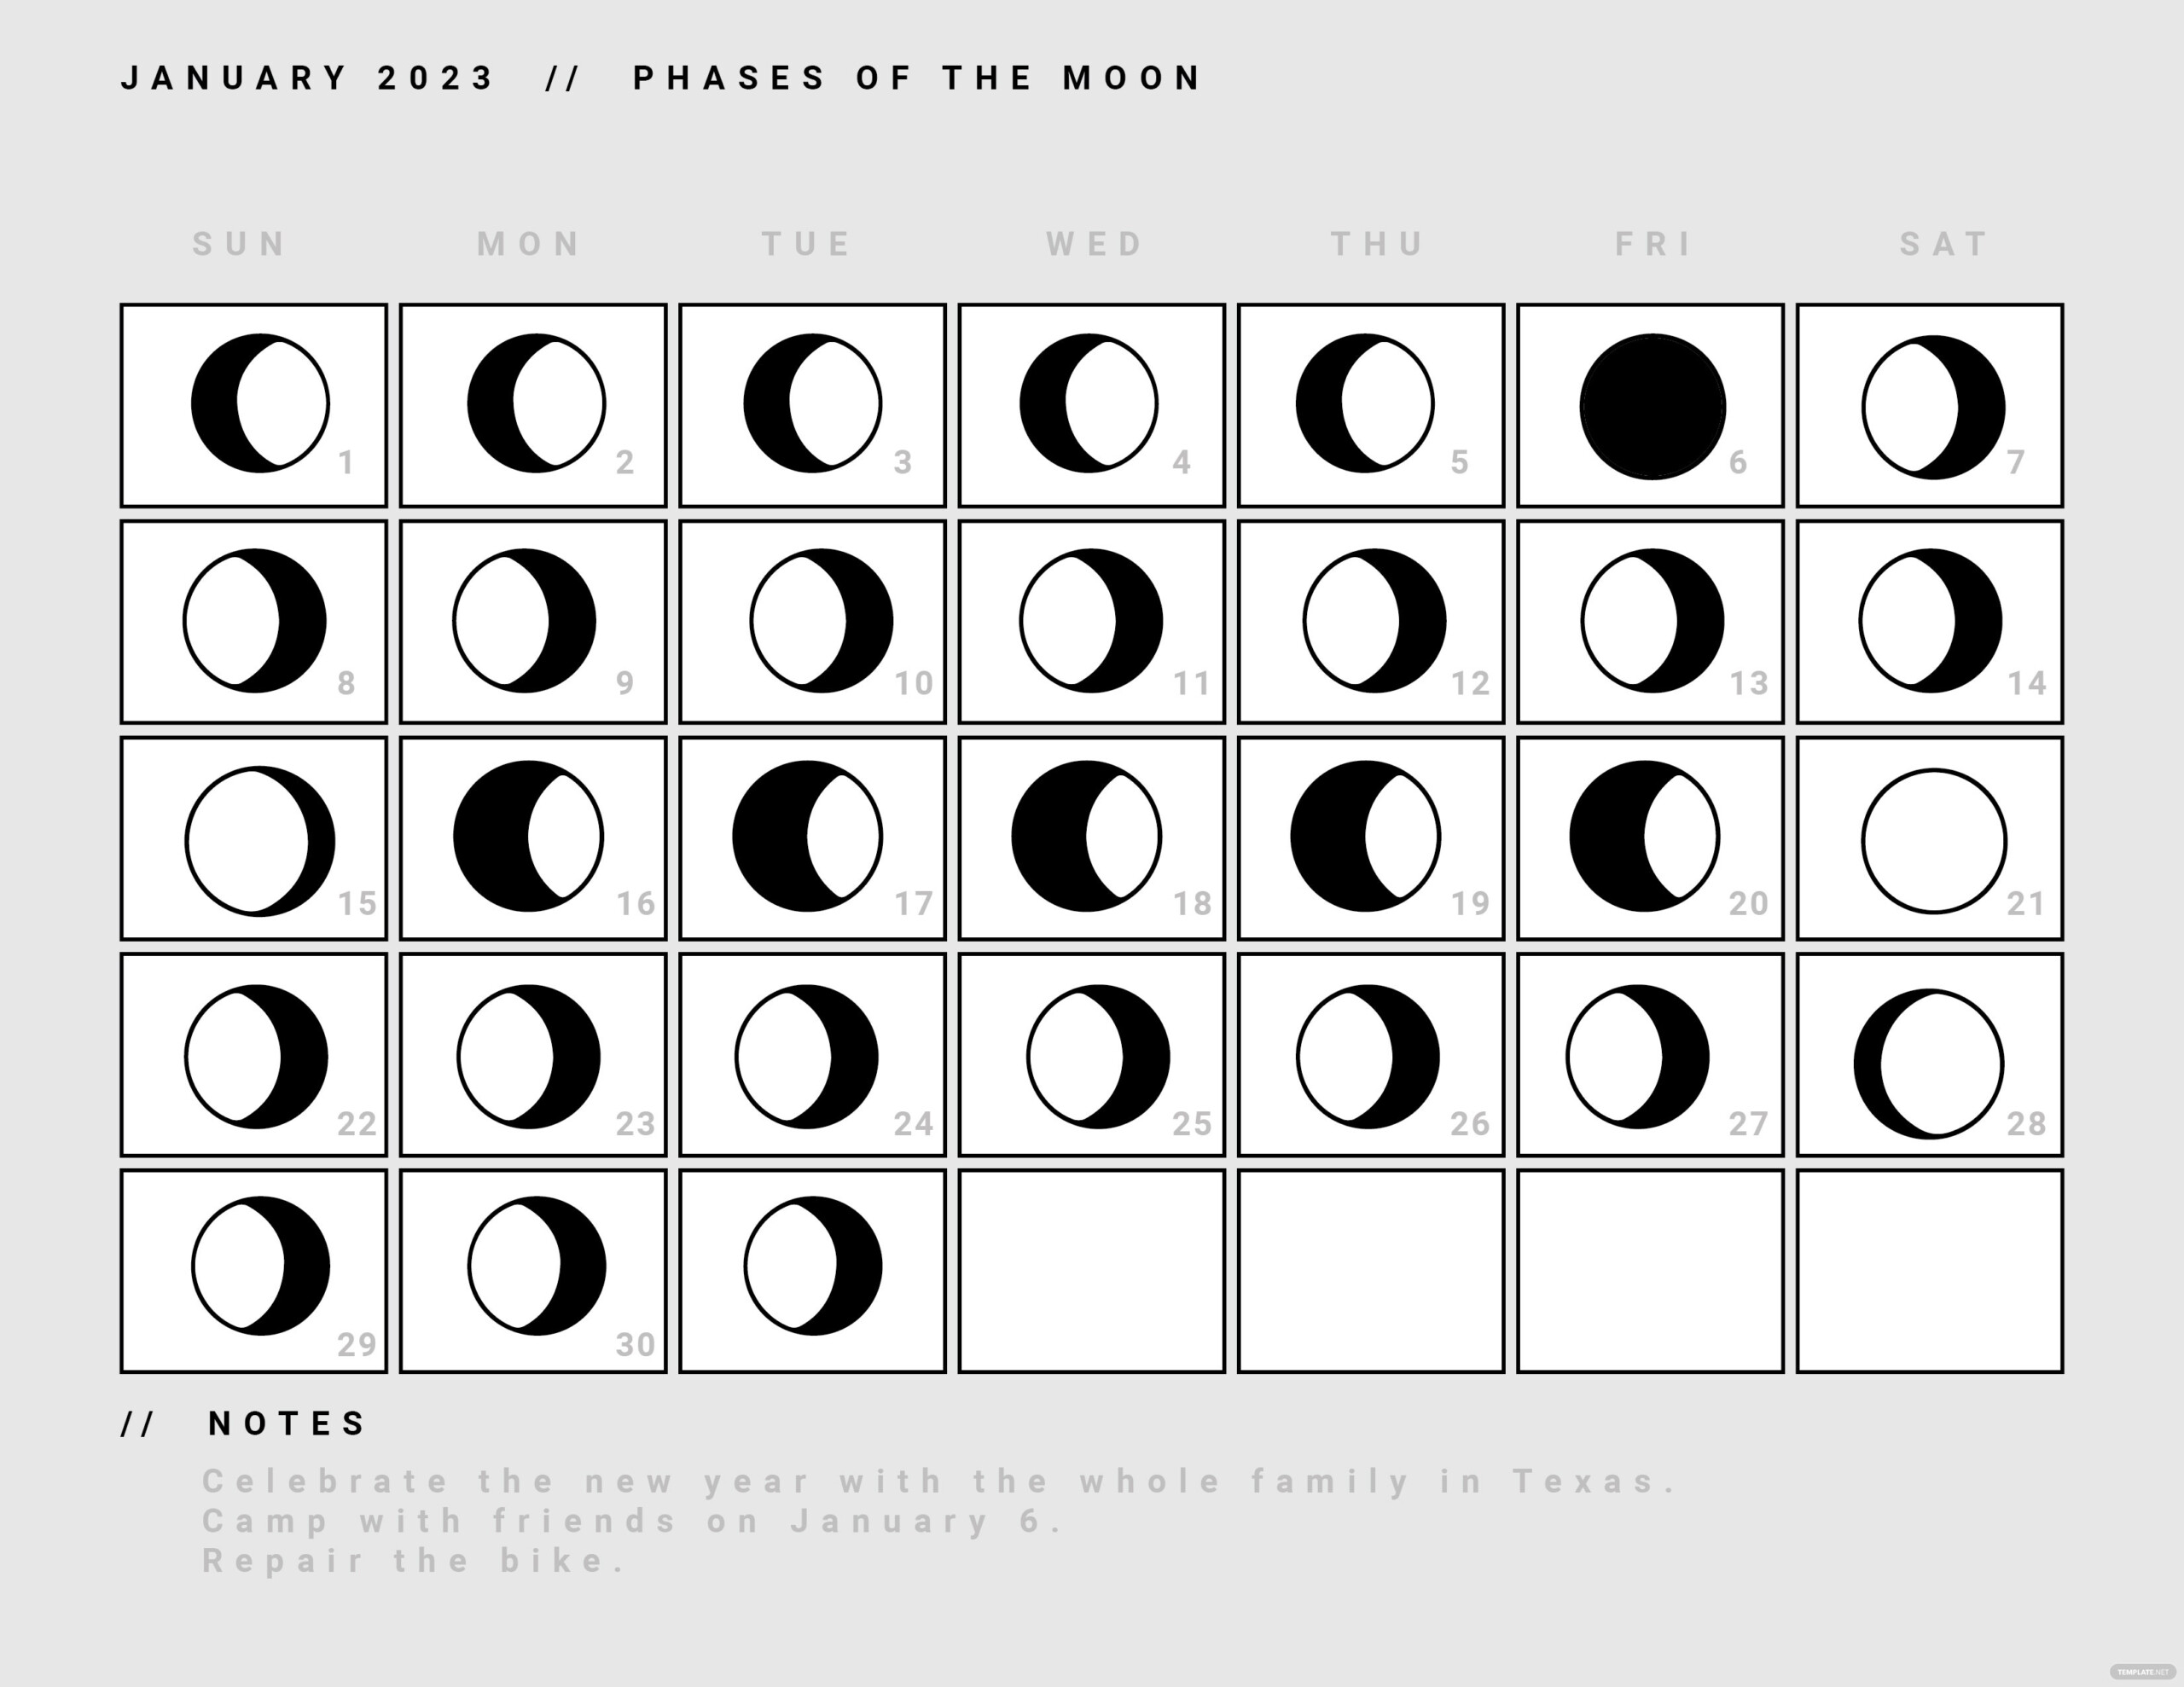 May 2023 Calendar Template With Moon Phases Google Docs Illustrator